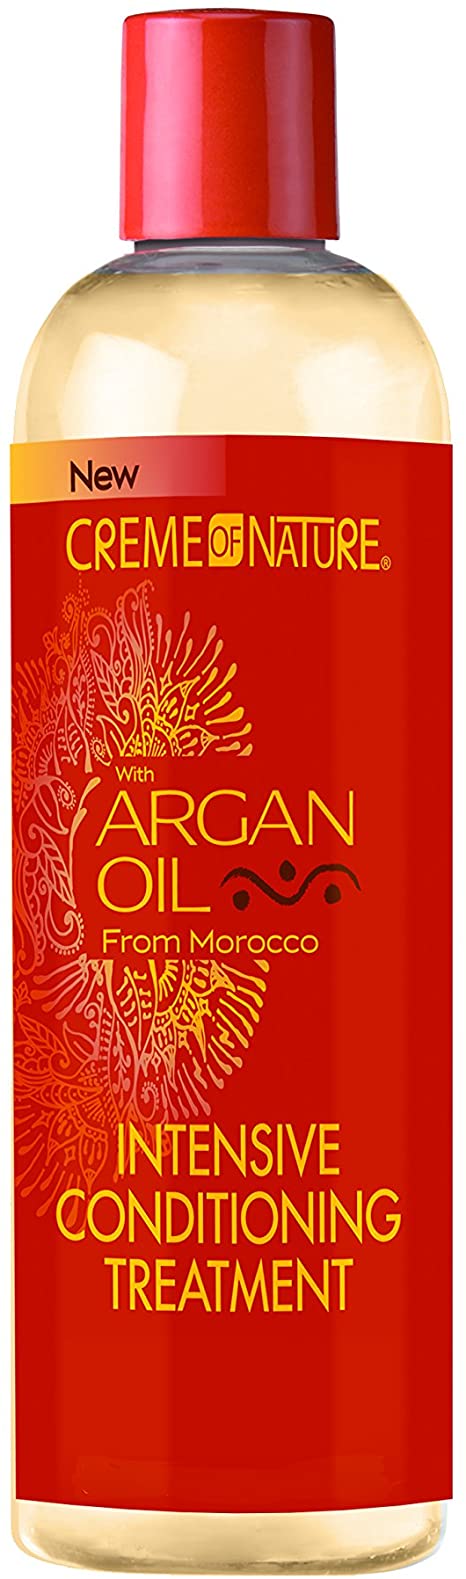 Creme of Nature Argan Oil Intensive Conditioning Treatment 354 ml